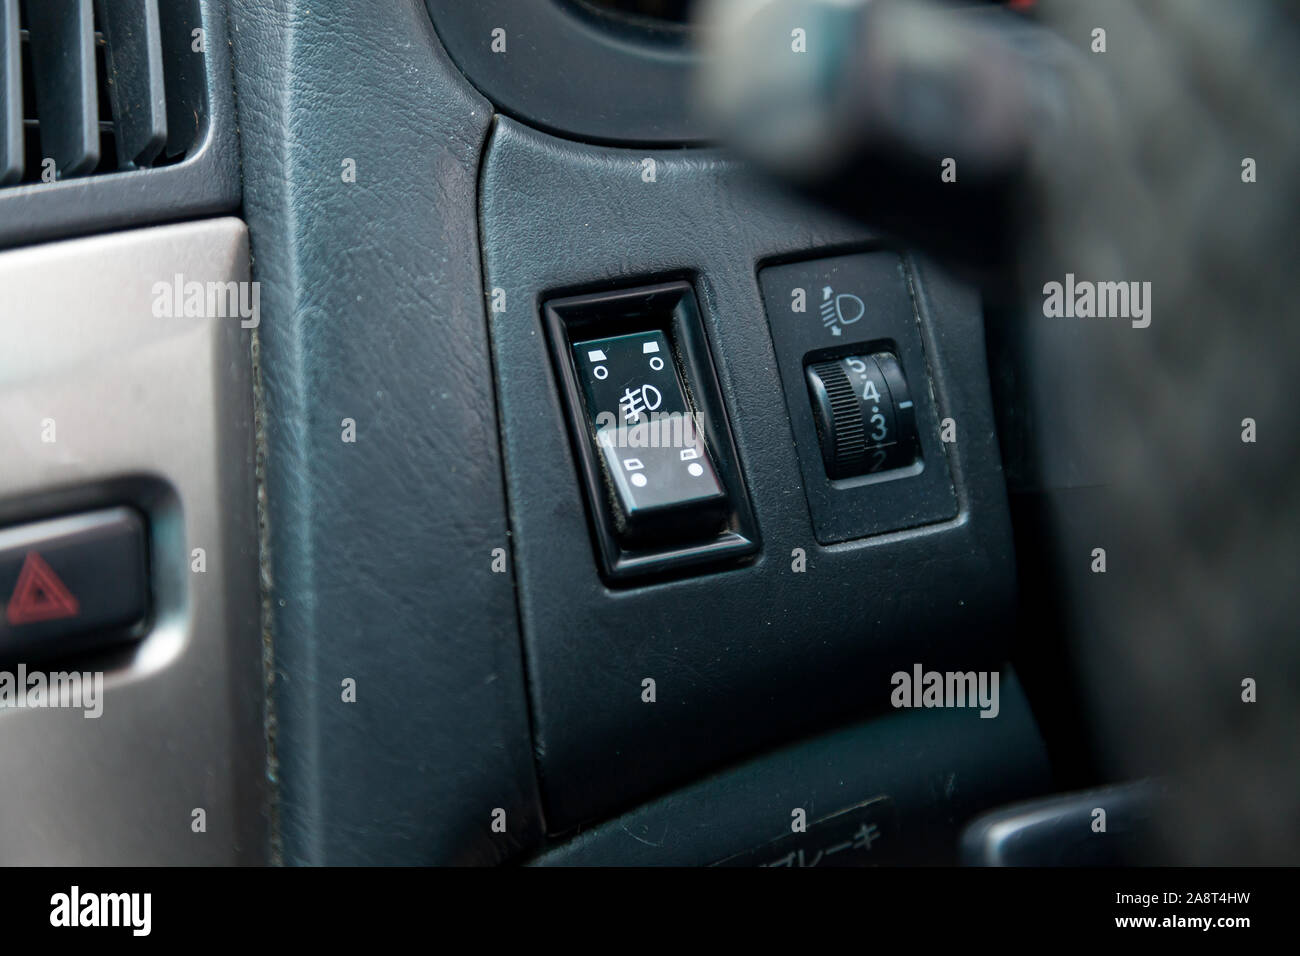 Novosibirsk, Russia - 11.05.2019: View to the gray interior of Toyota Harrier or Lexus RX300 with dashboard, adjust buttons after cleaning before sale Stock Photo